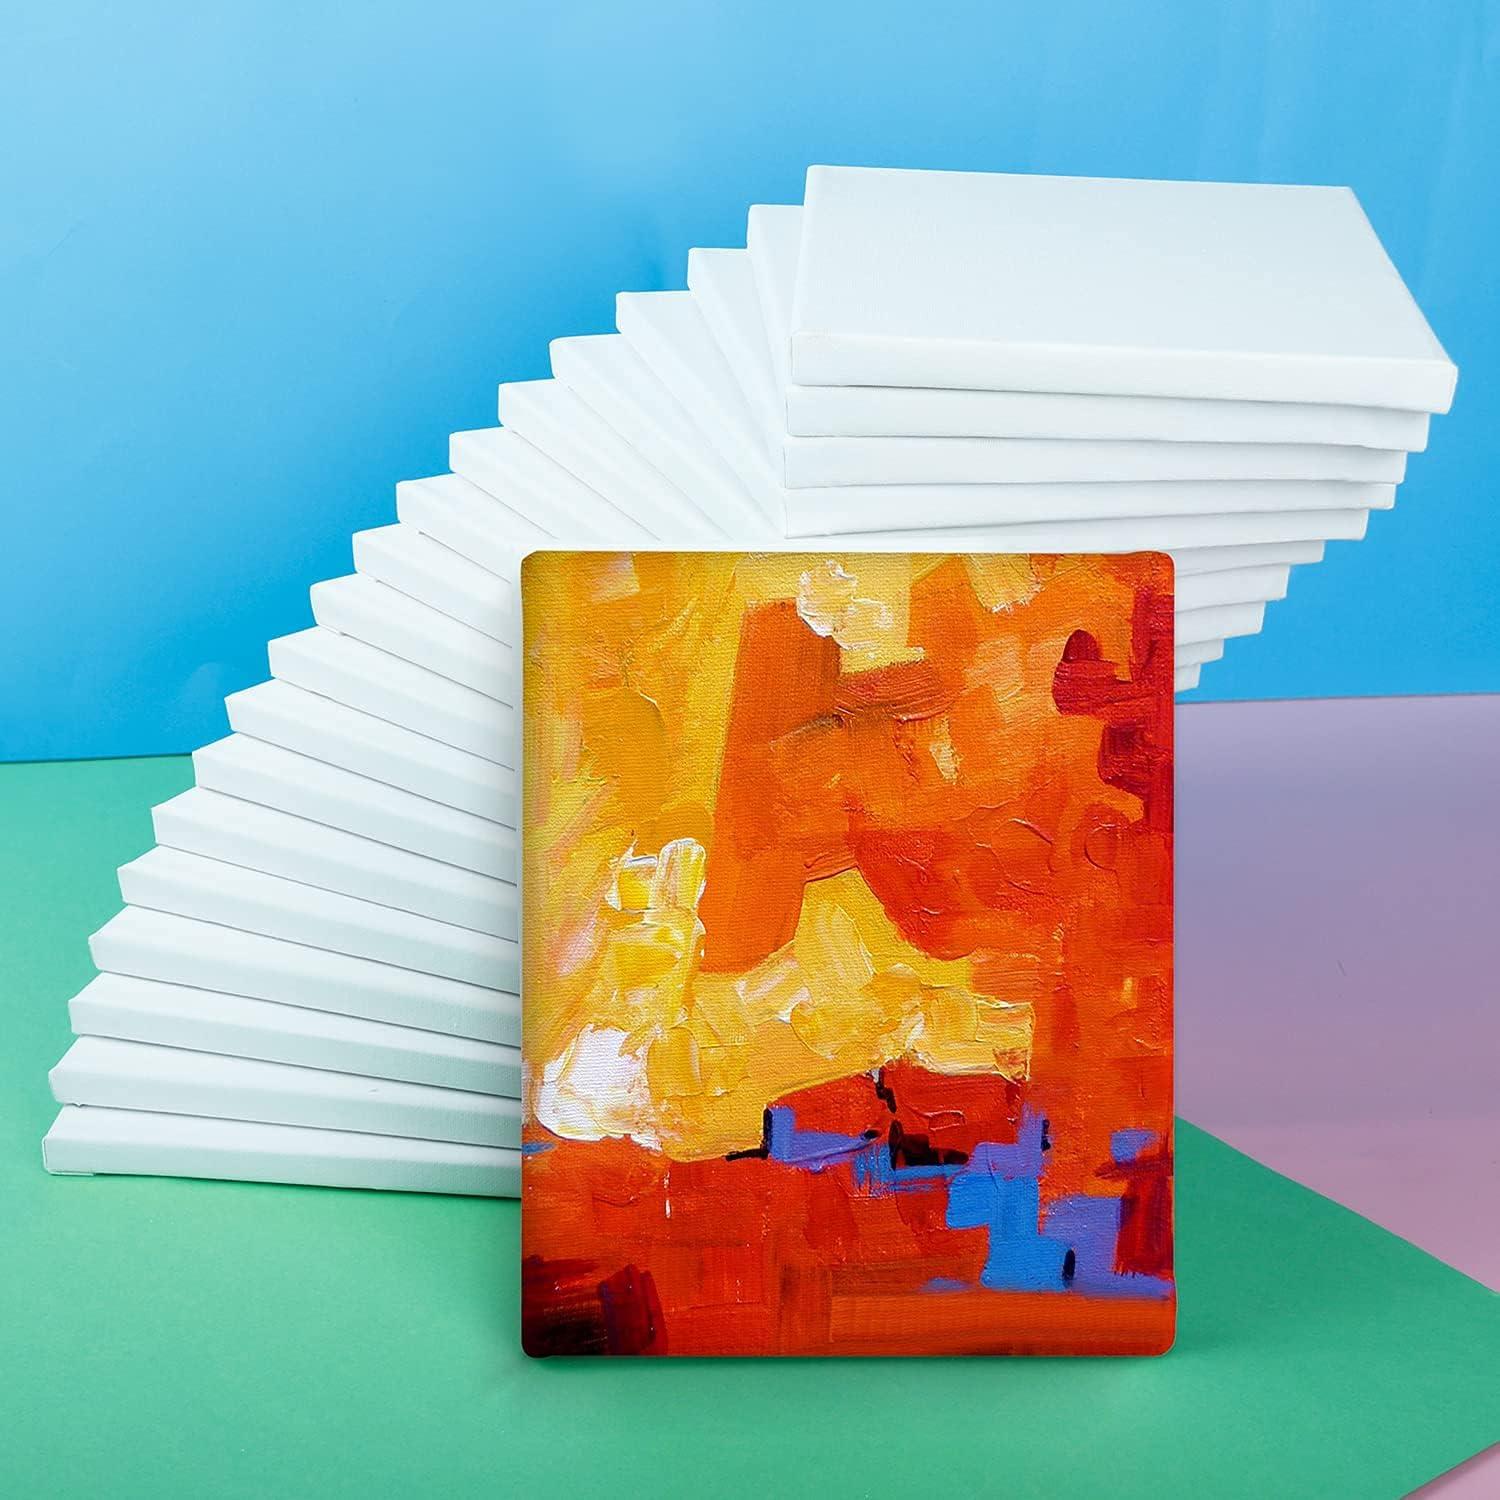 14 Packs Stretched Canvases for Painting Multi Pack 11x14 9.44x12